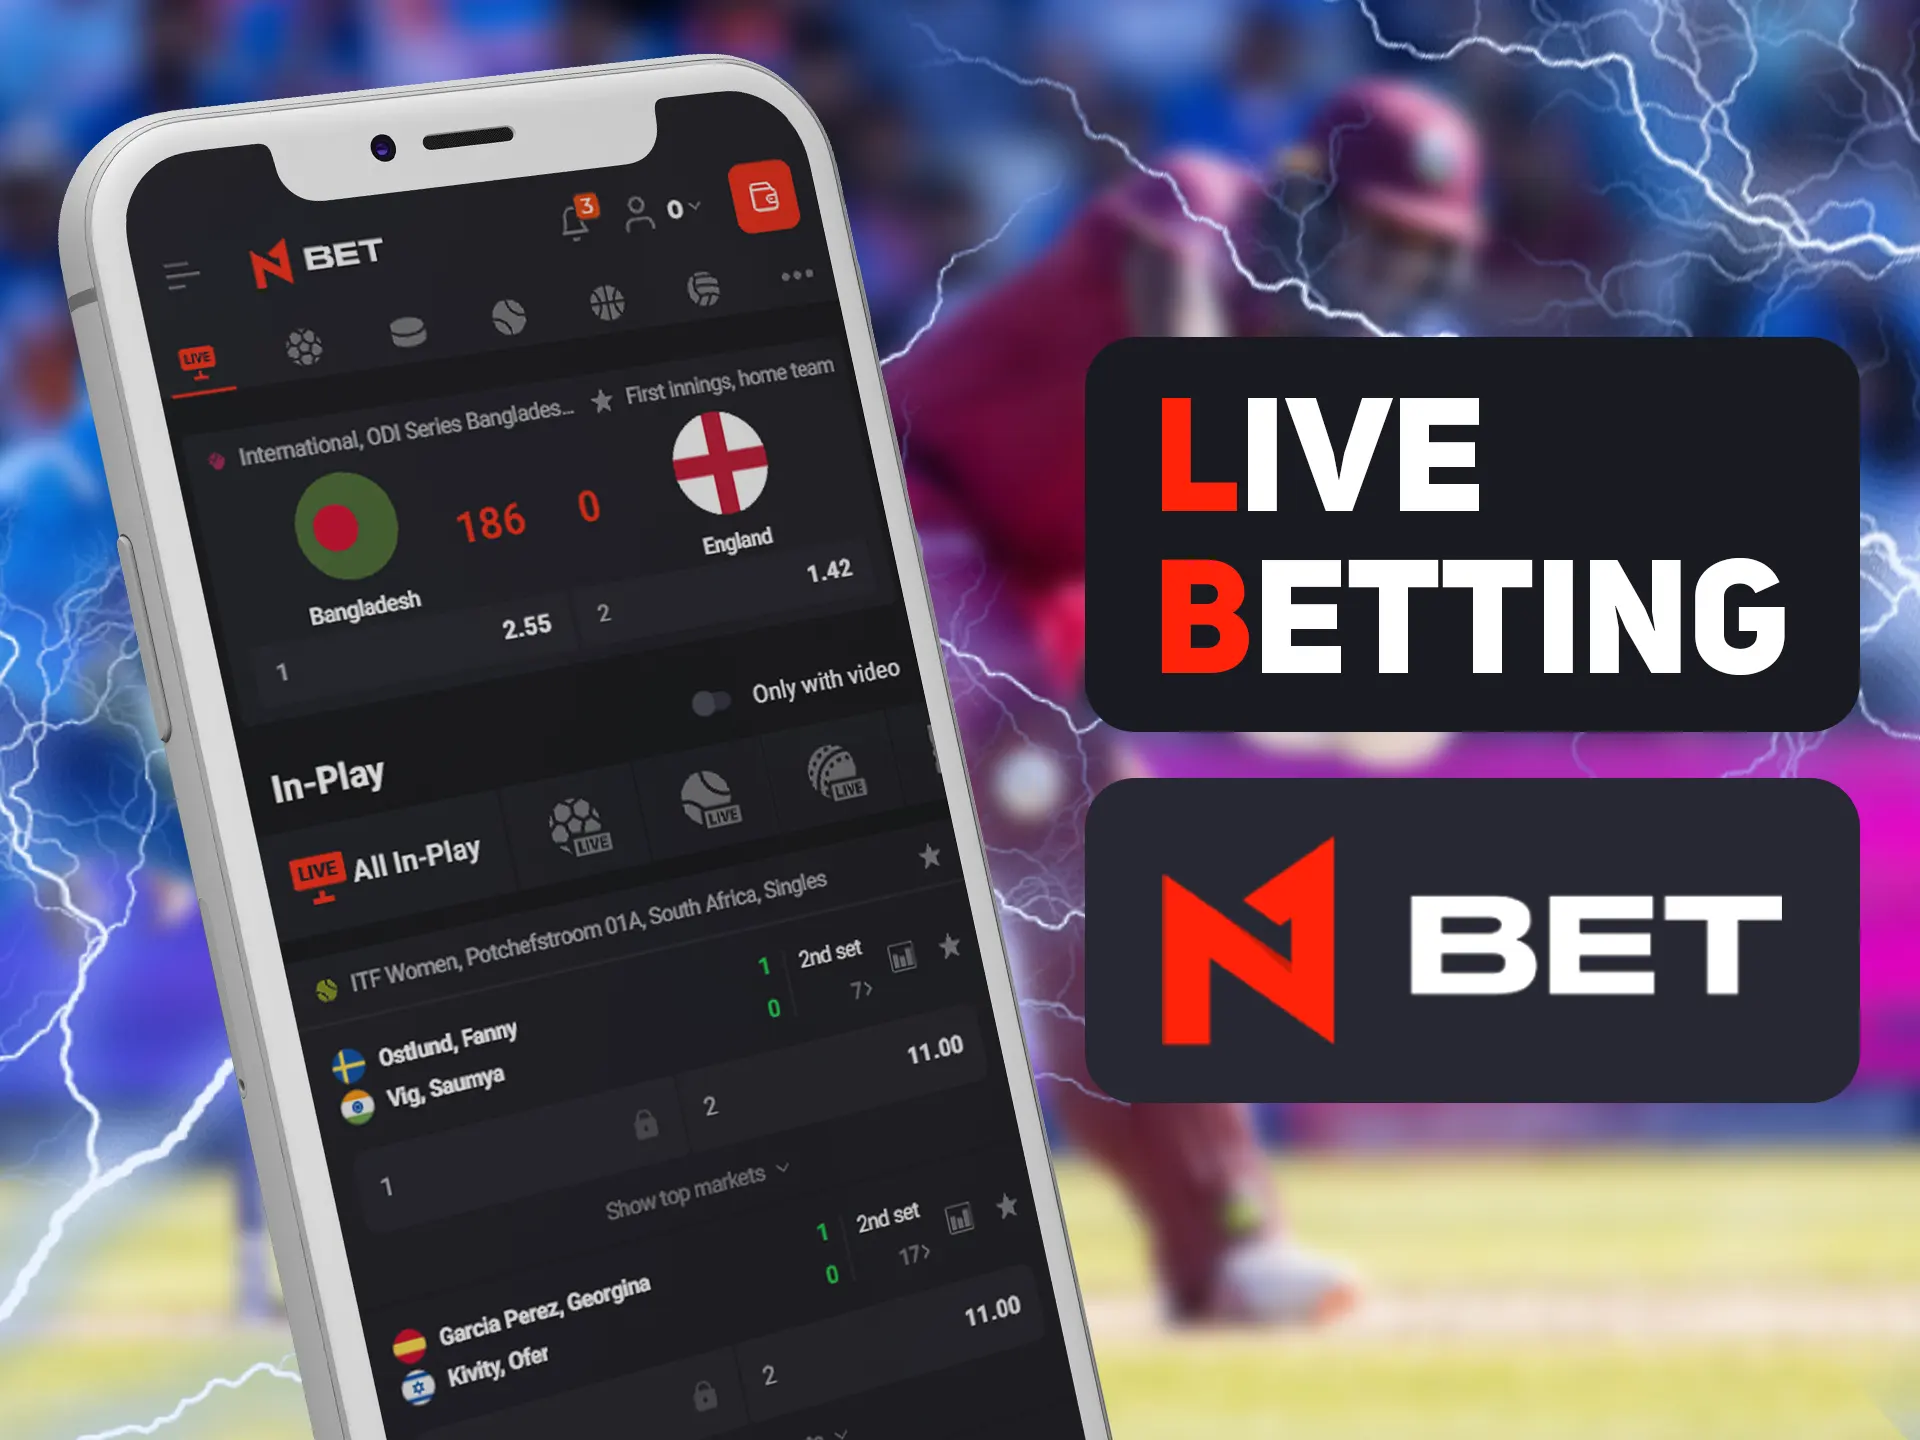 Bet in live format on match page at N1bet.